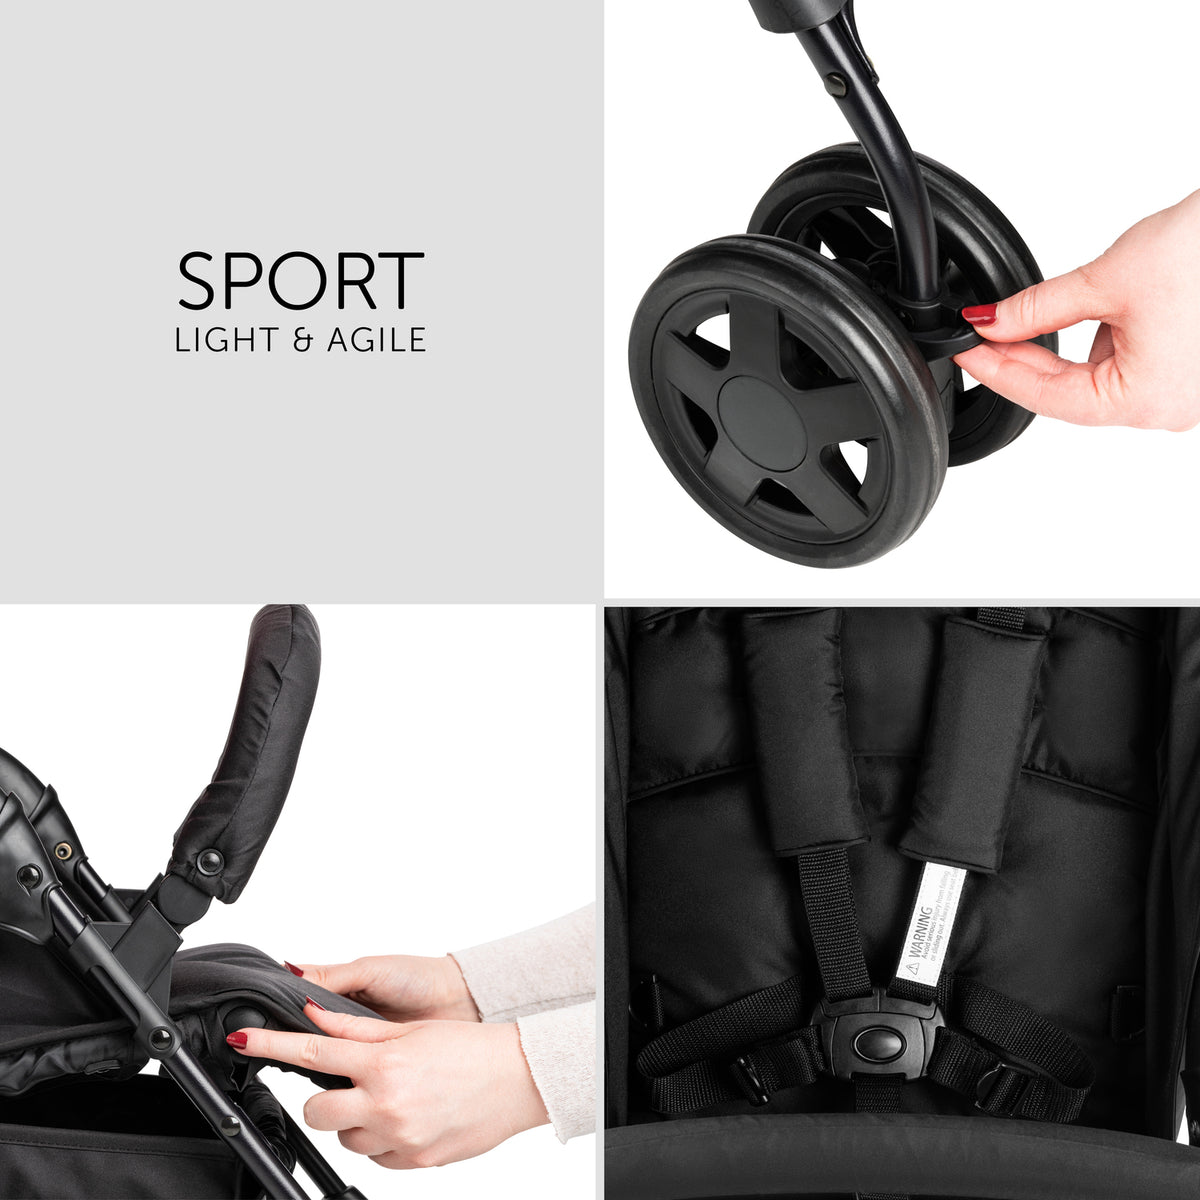 Sport T13 Lightweight Compact Foldable Stroller with UV Protected Canopy